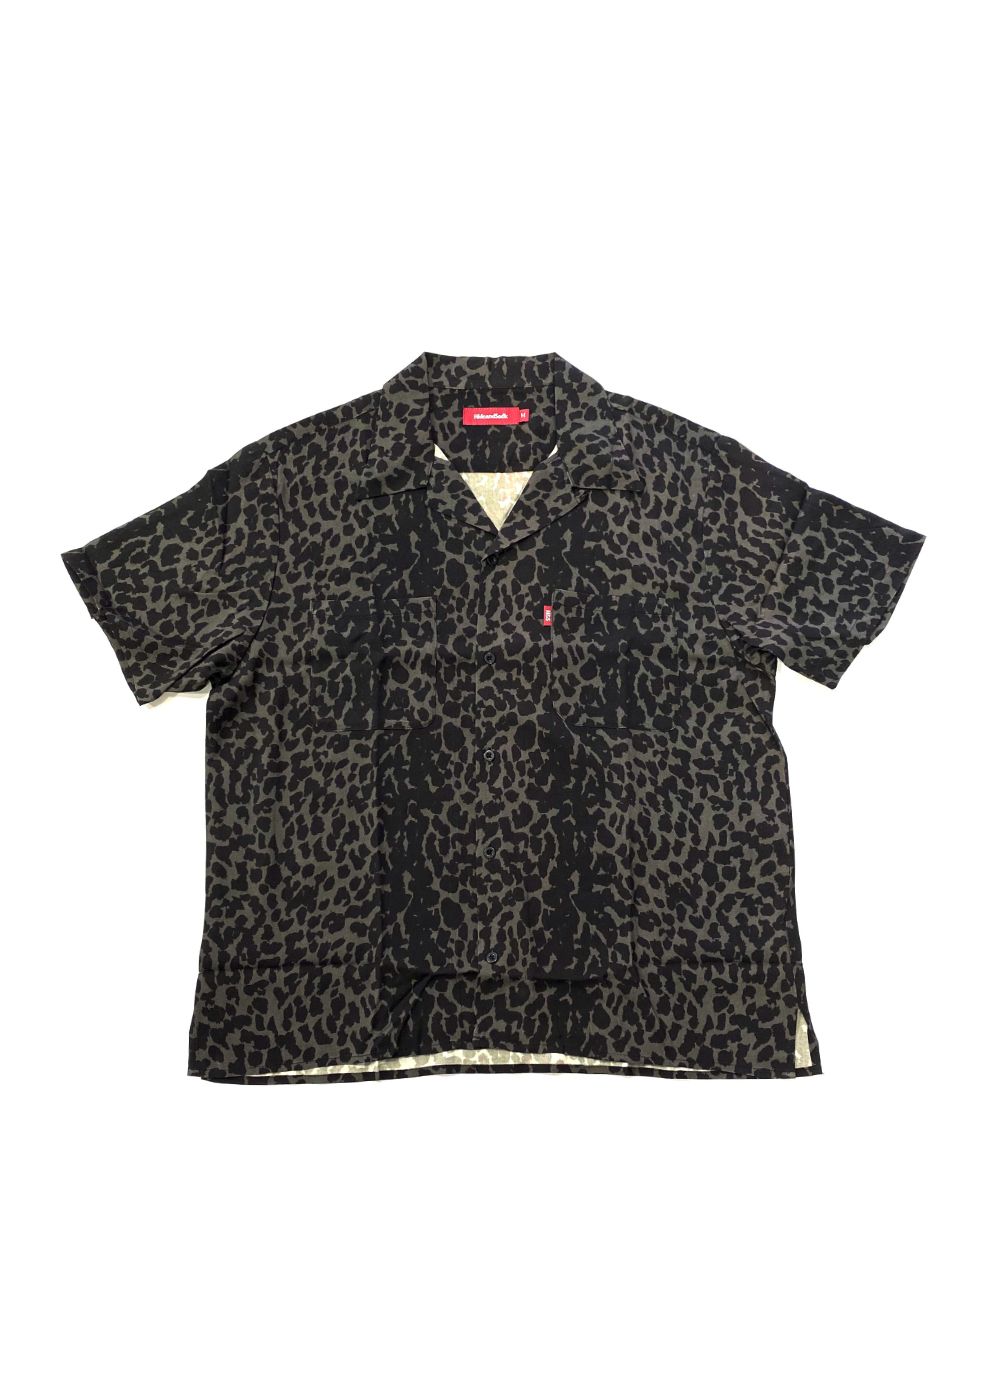 HIDE AND SEEK - PANTHER S/S SHIRT (BLACK) / オリジナル パンサー